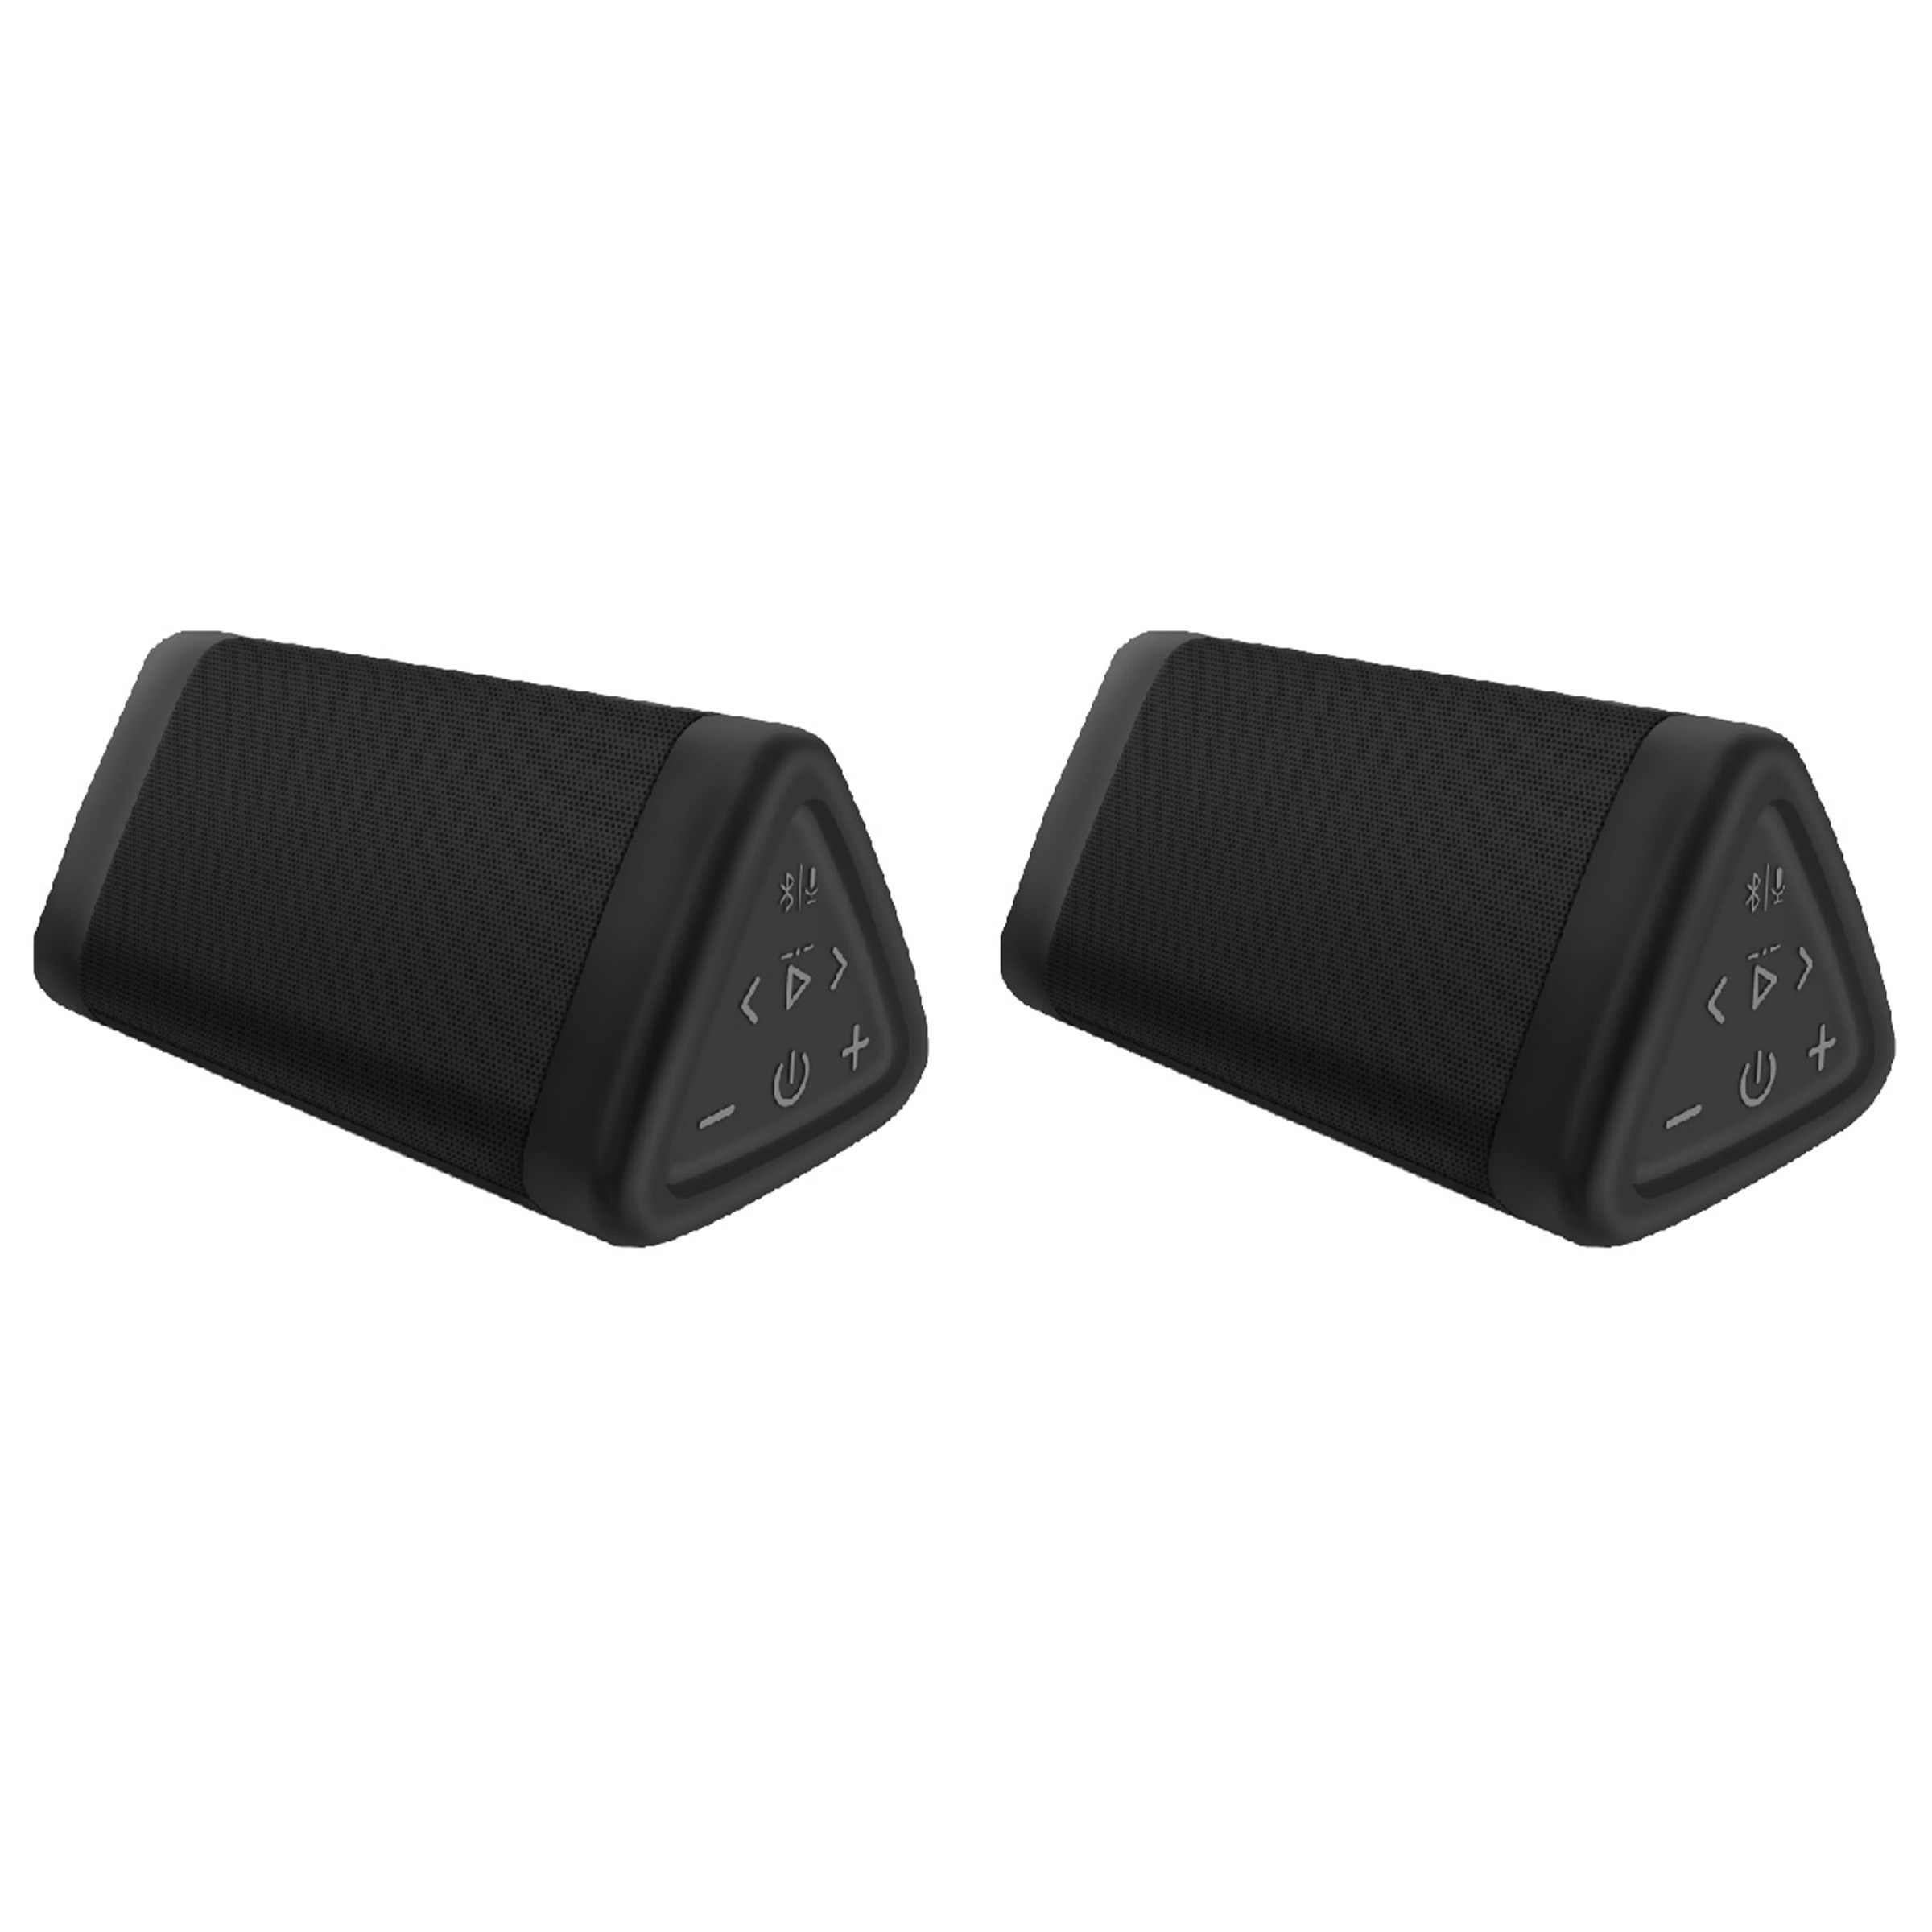 OontZ Angle 3S DUAL Portable Bluetooth Speakers, Enhanced Edition Two Speakers, Loud Sound 10W Power, Excellent Stereo Sound, 100 Ft Range, IPX5 - image 1 of 5